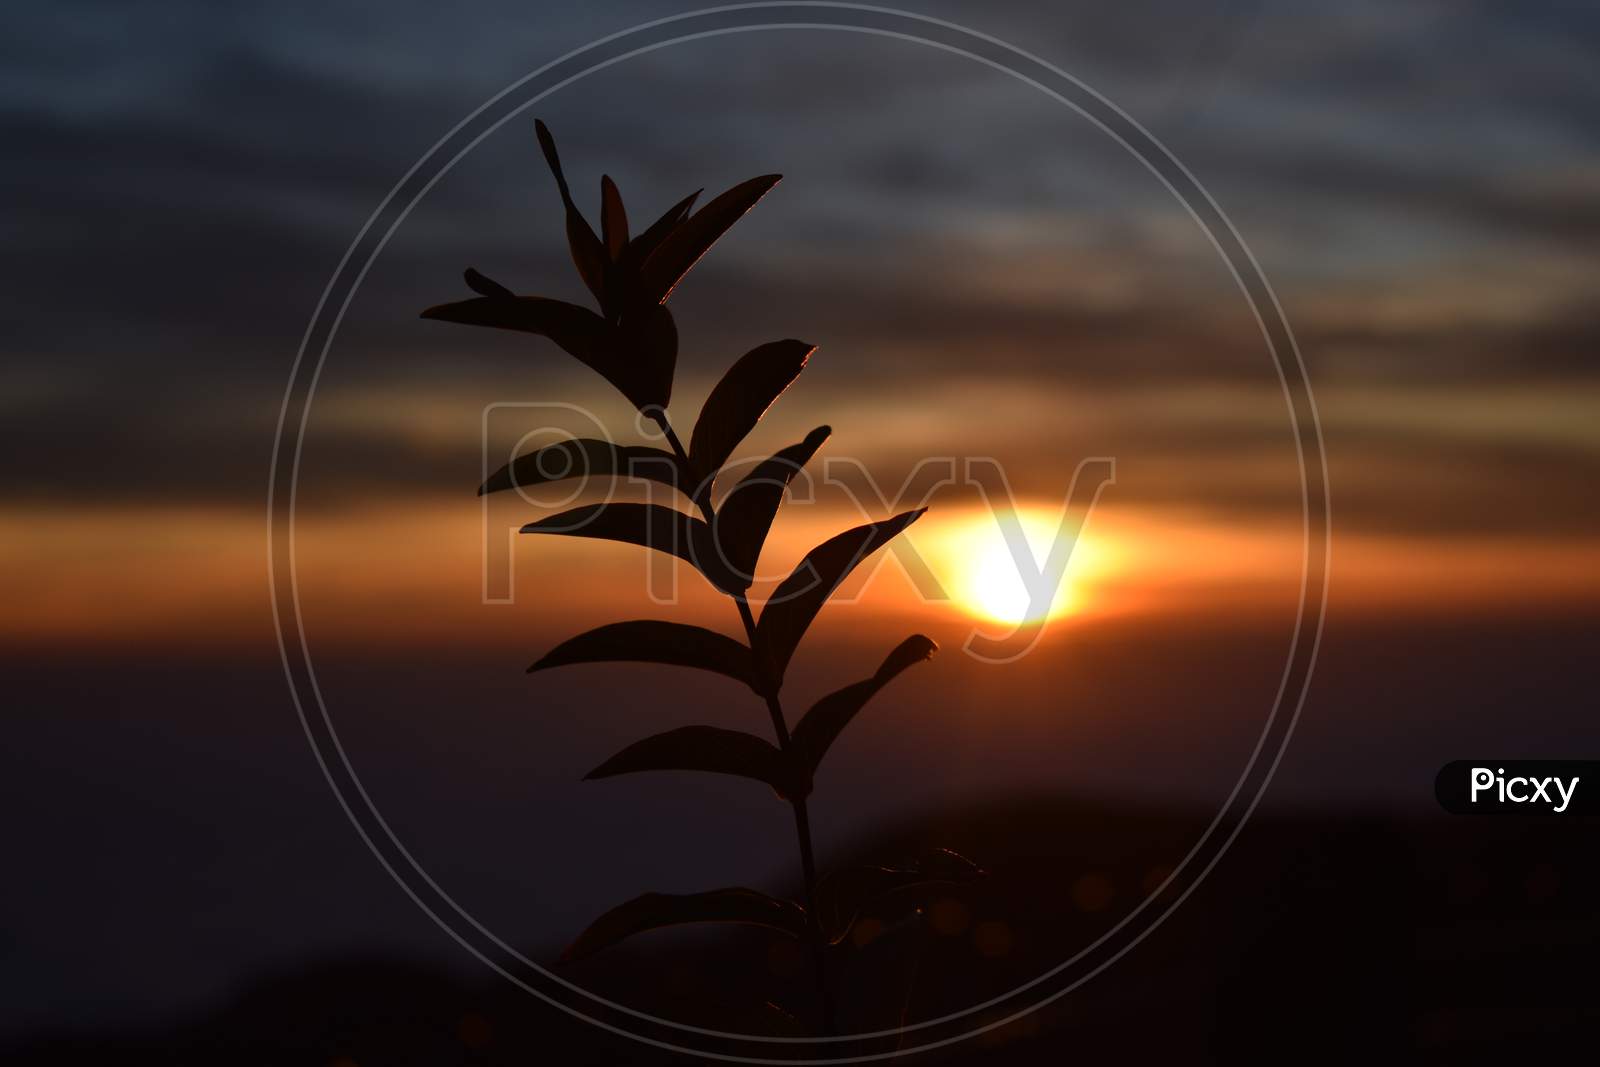 Beautiful Picture Of Plant And Sunset Background In Uttarakhand